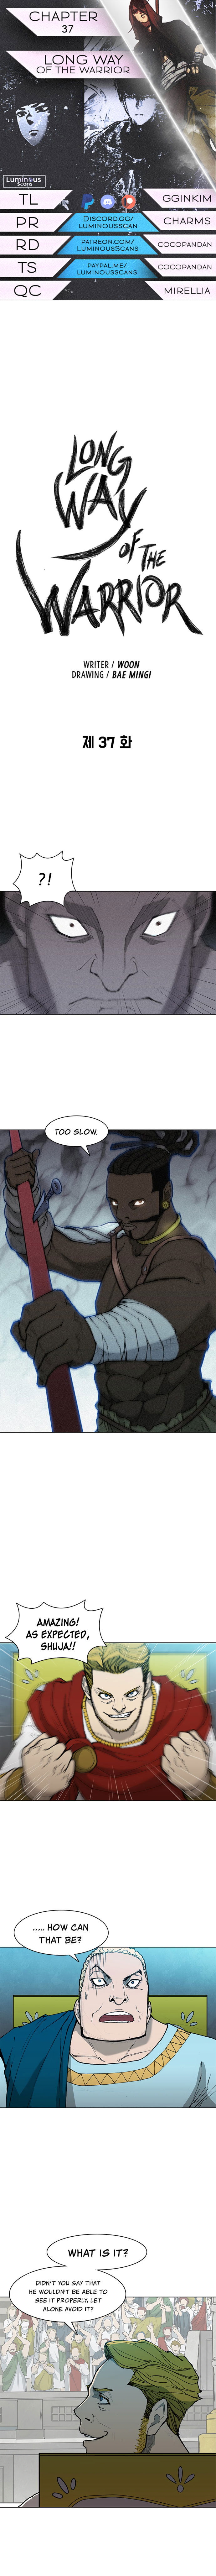 long-way-of-the-warrior-chap-37-0